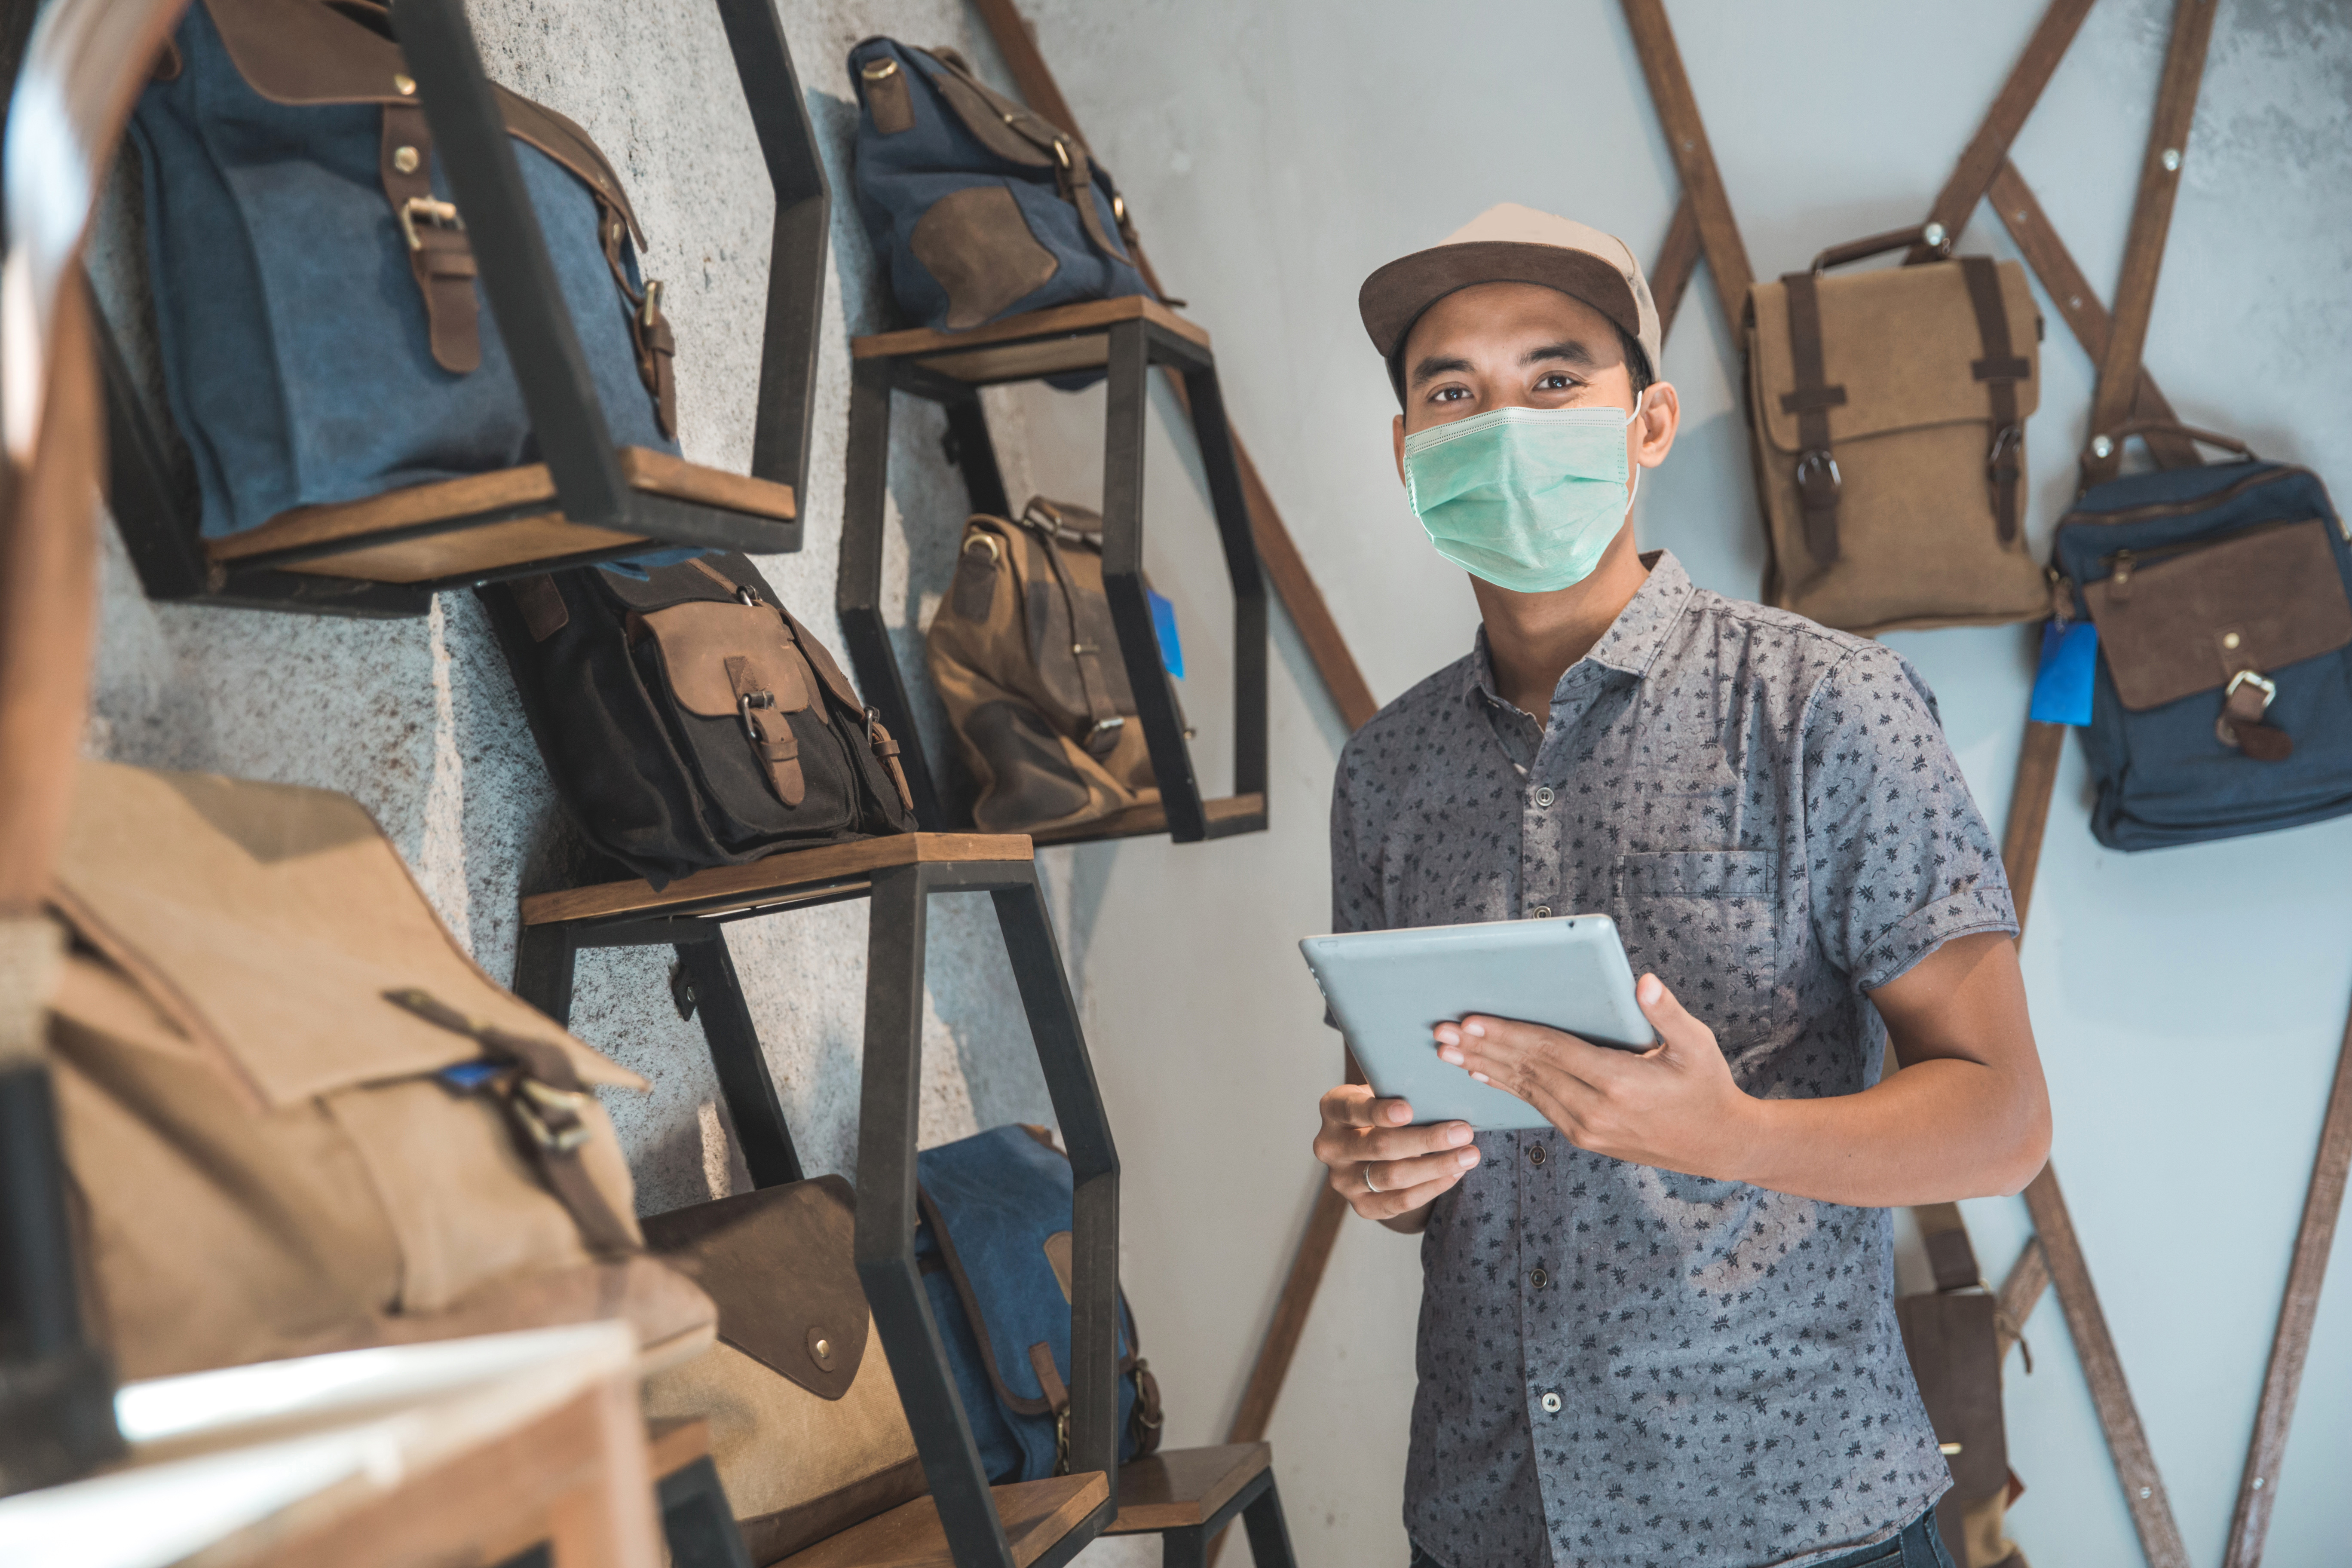 How Health and Safety Market Research Can Help Retailers Enforce Mask Policies